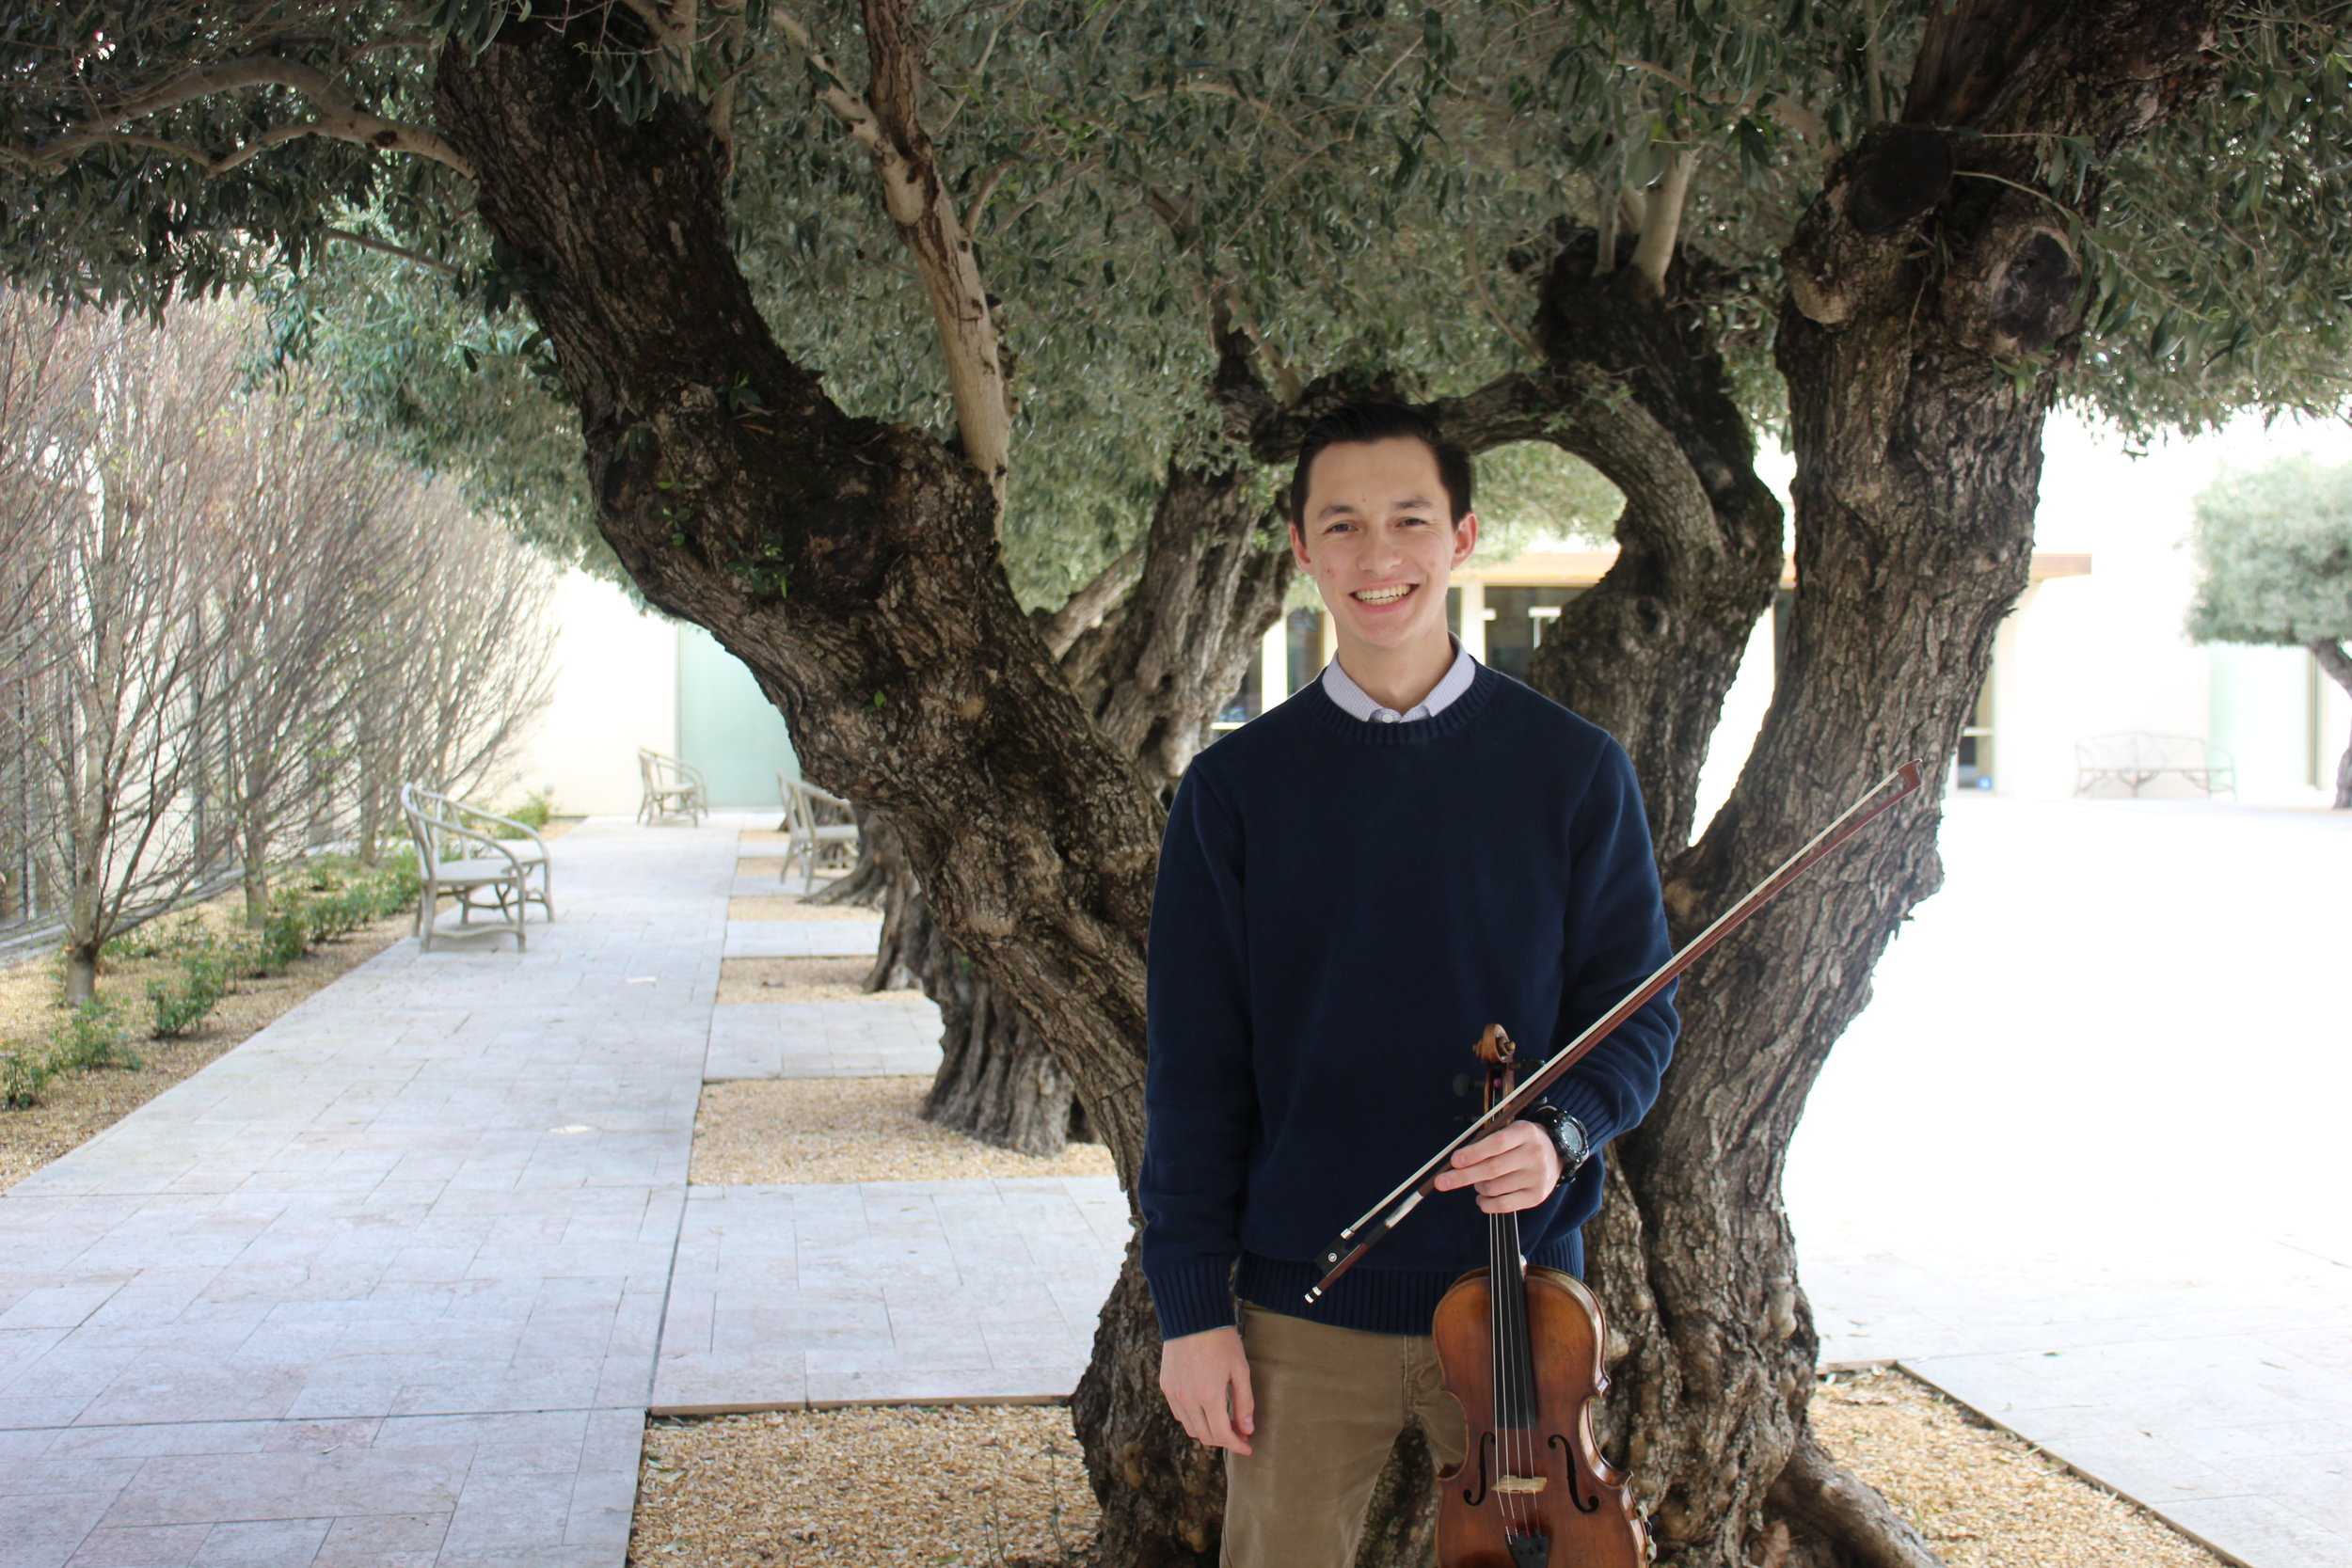 Senior Music Education major and violinist Caleb Forschen will be performing his senior recital on April 10. STAR // Emily Kowalski